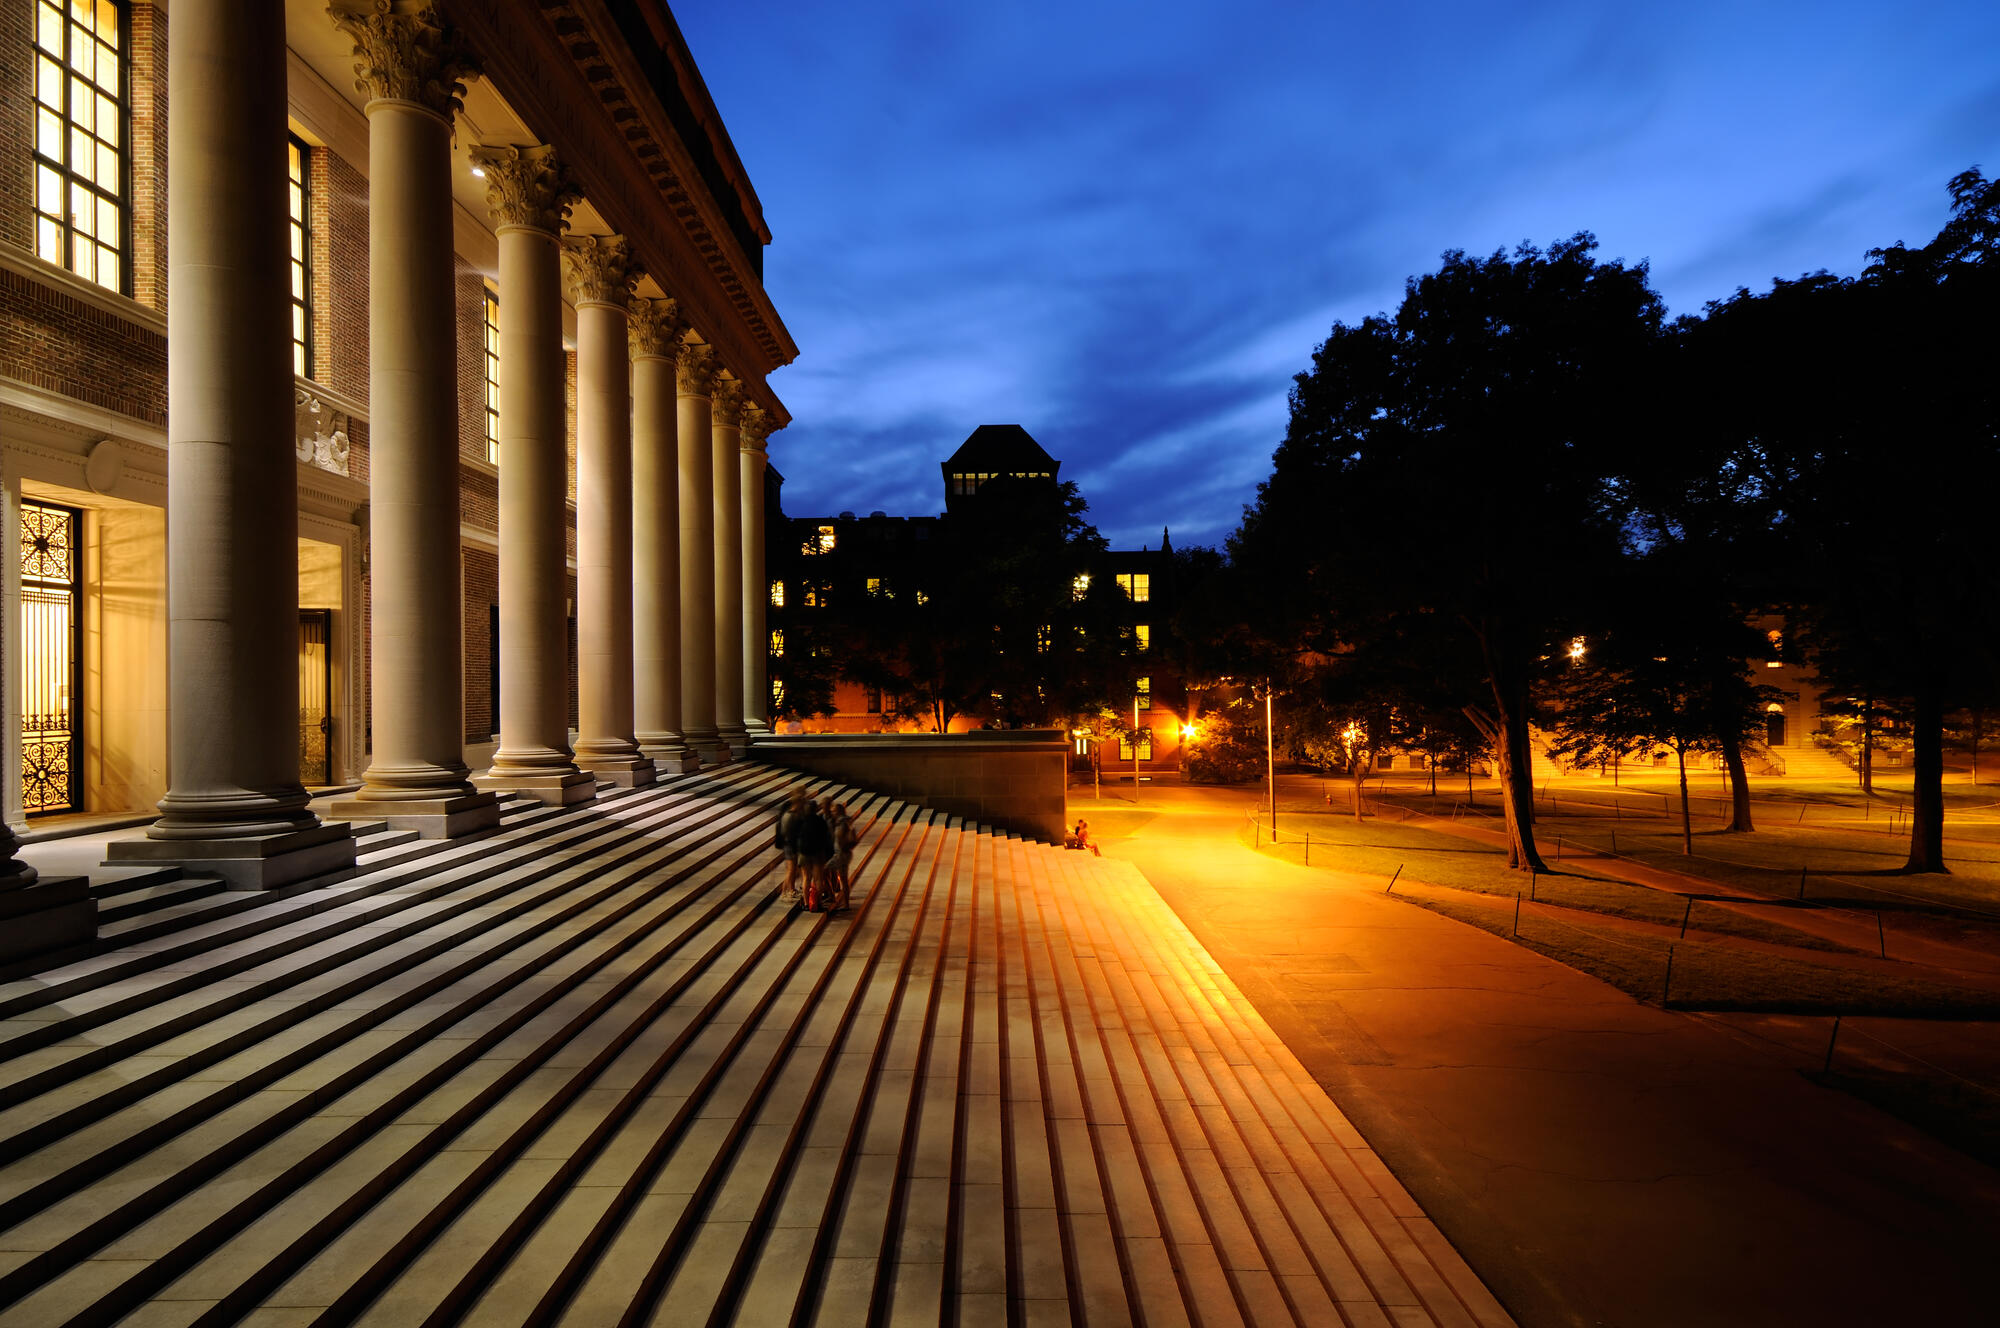 The steps of Widener Library at night